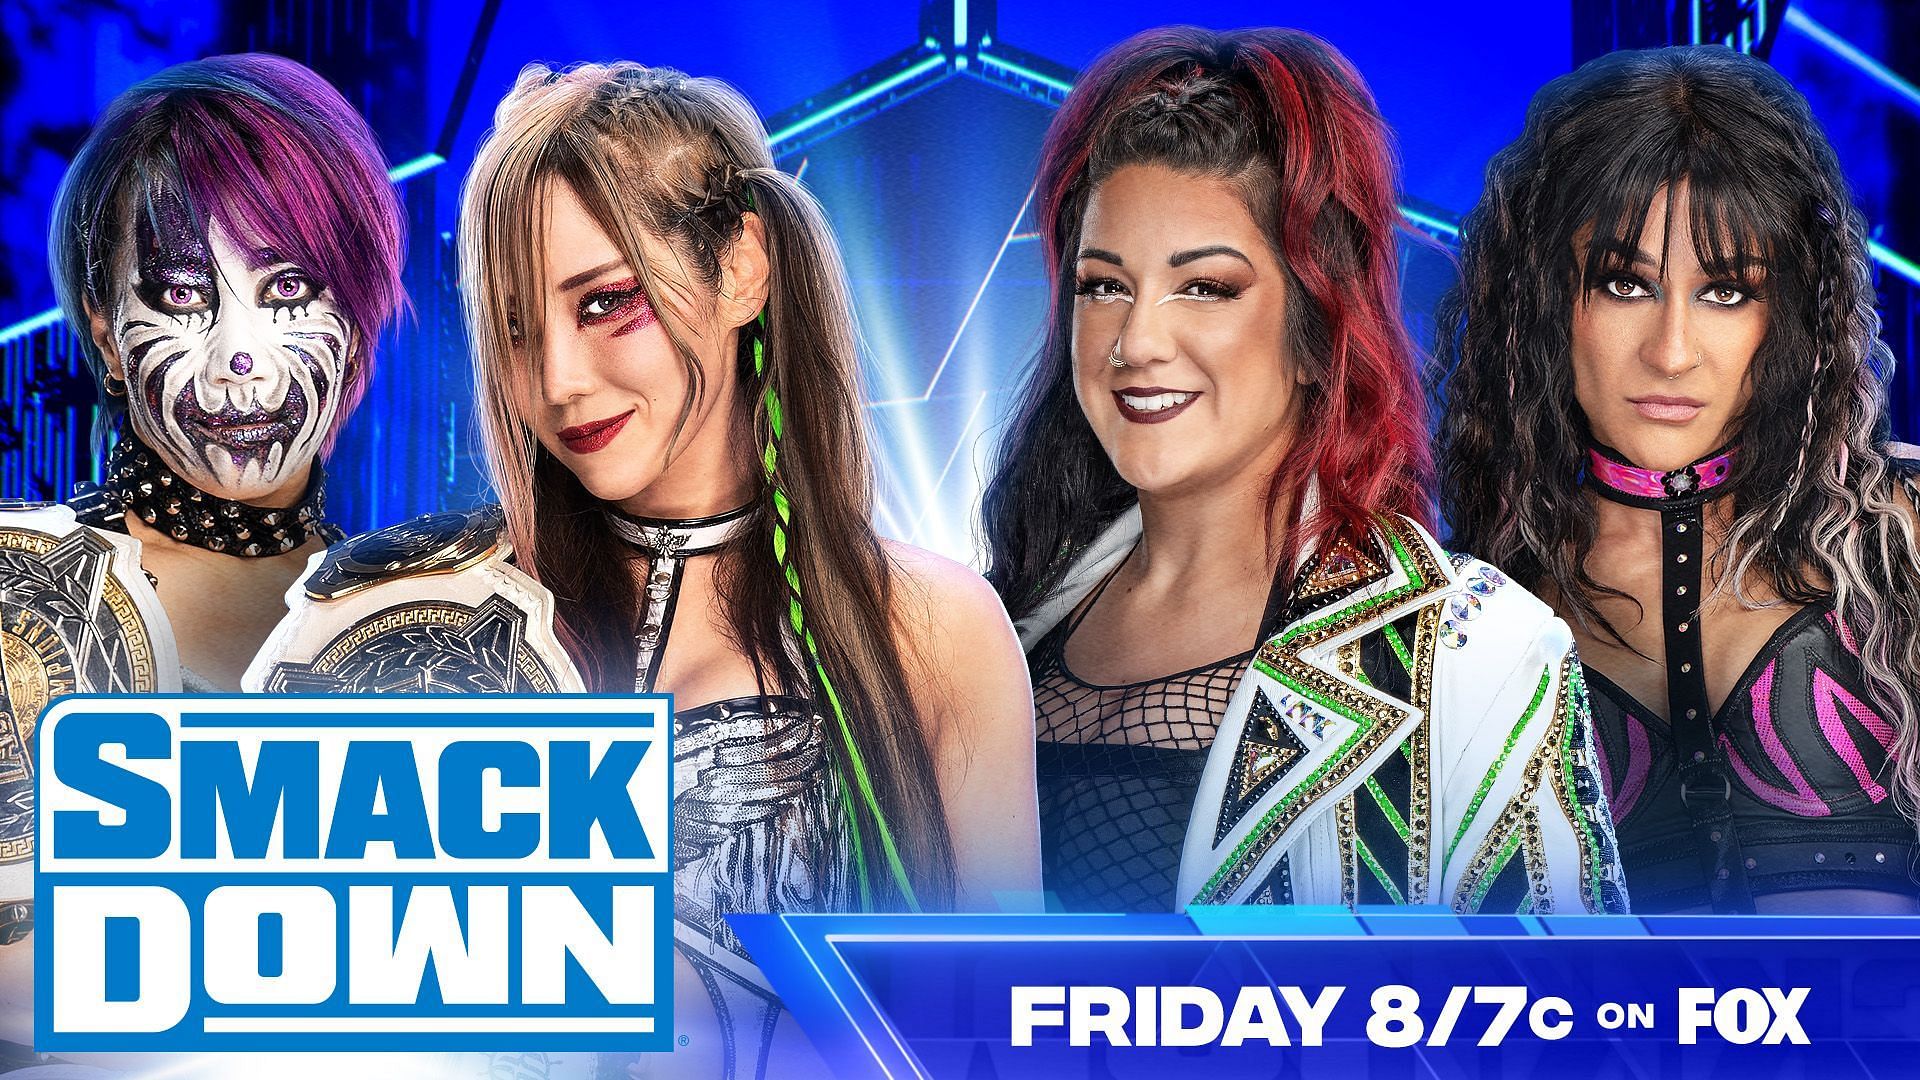 A major tag team match is scheduled for WWE SmackDown